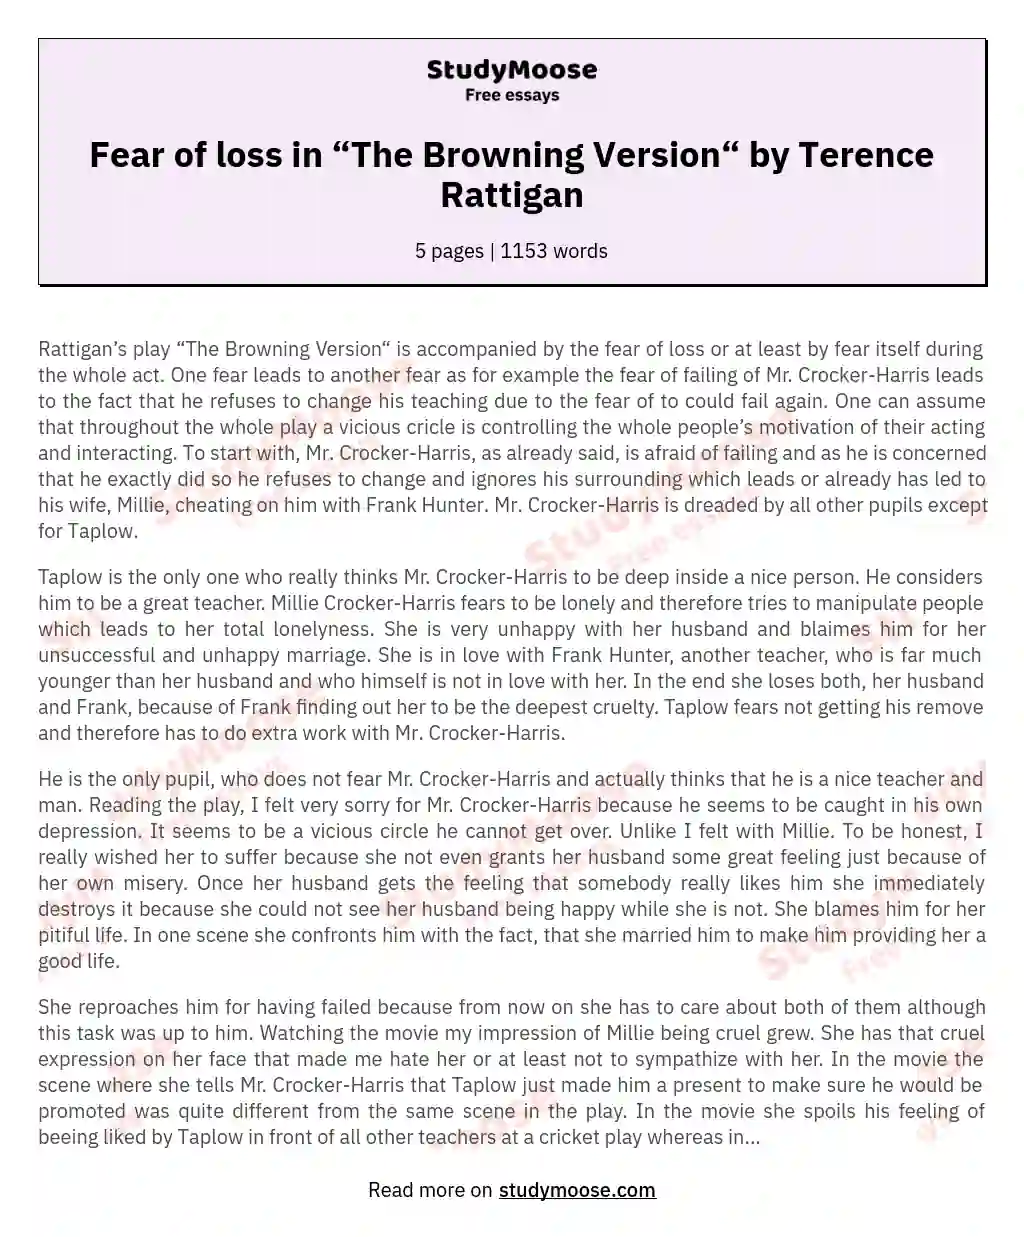 Fear of loss in “The Browning Version“ by Terence Rattigan essay